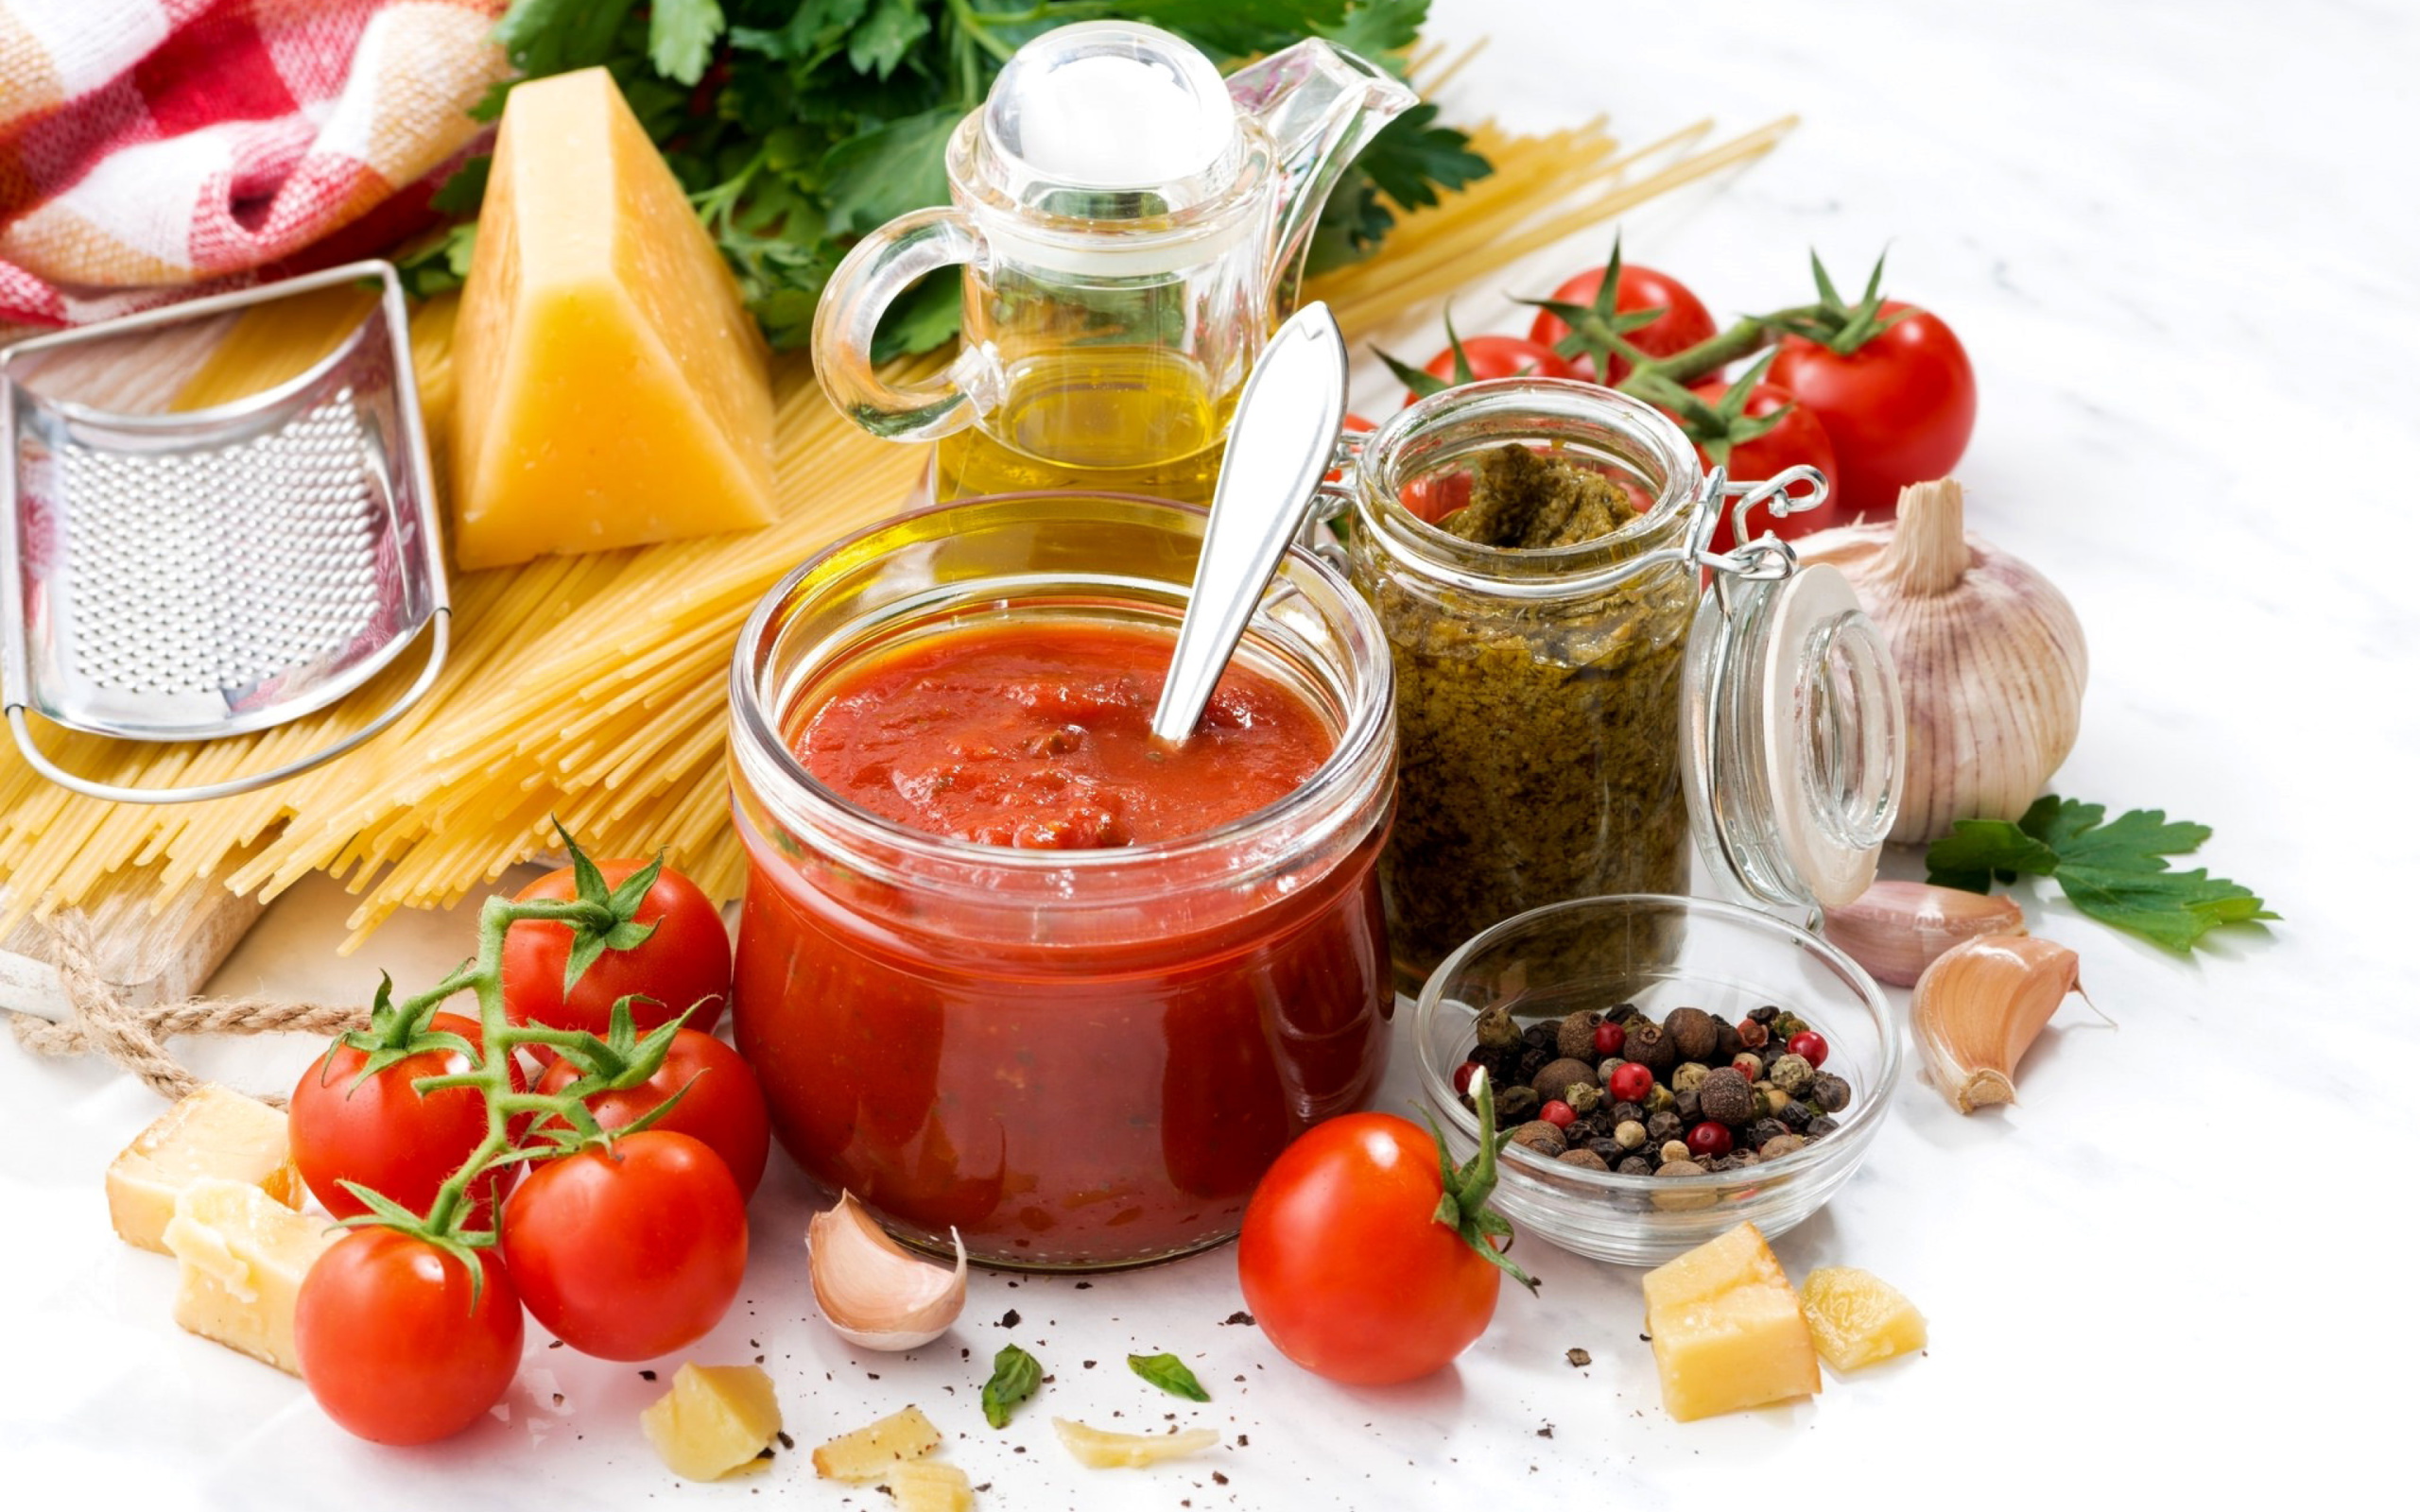 Lecho with tomatoes, spices and cheese wallpaper 2560x1600